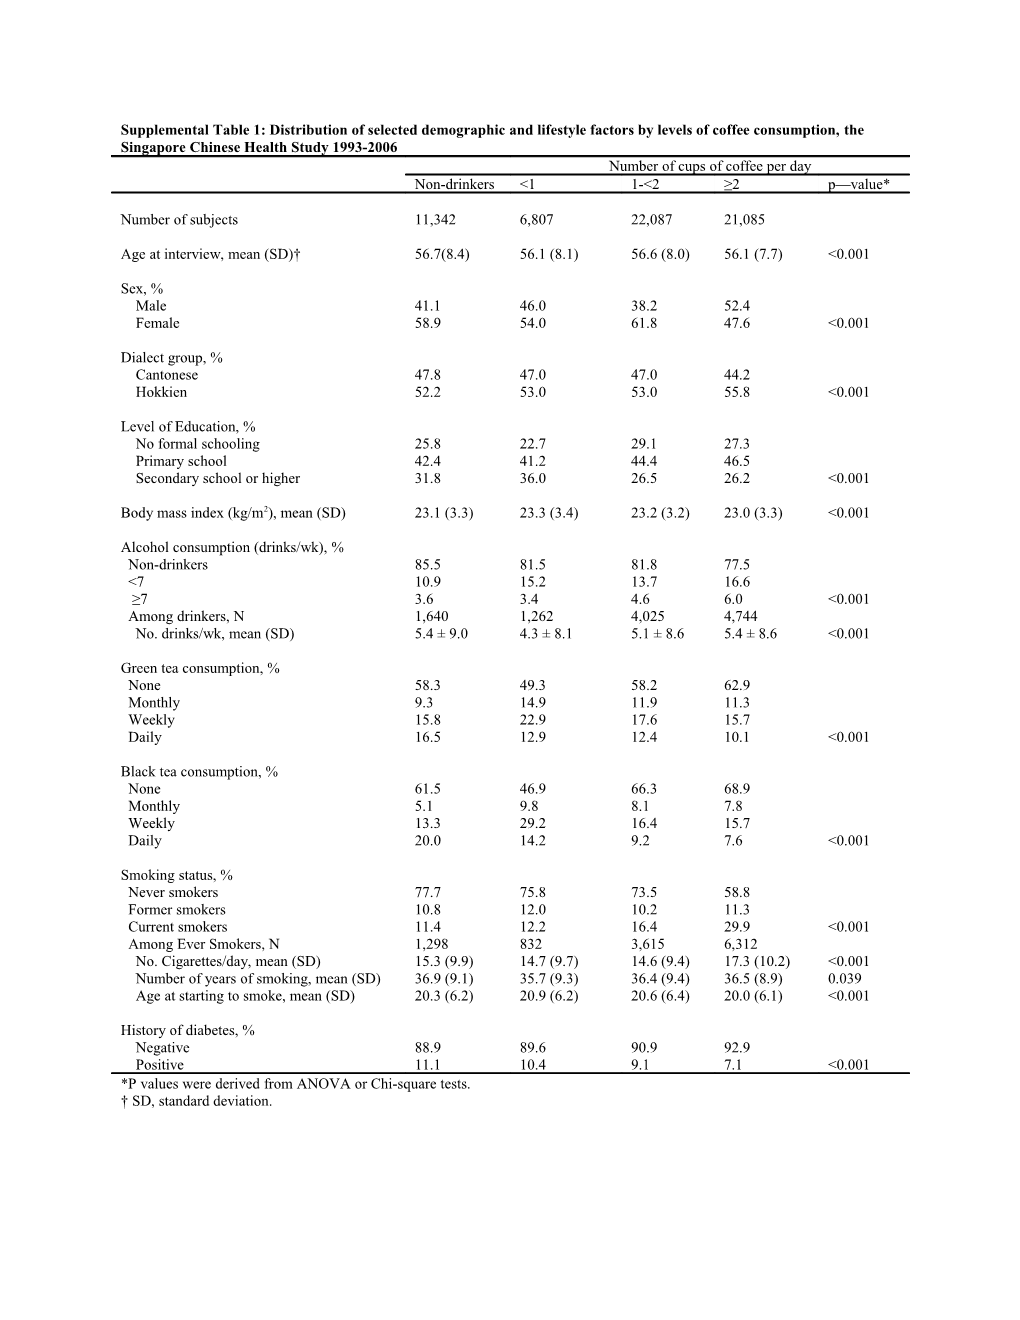 Supplemental Table 1: Distribution of Selected Demographic and Lifestyle Factors by Levels